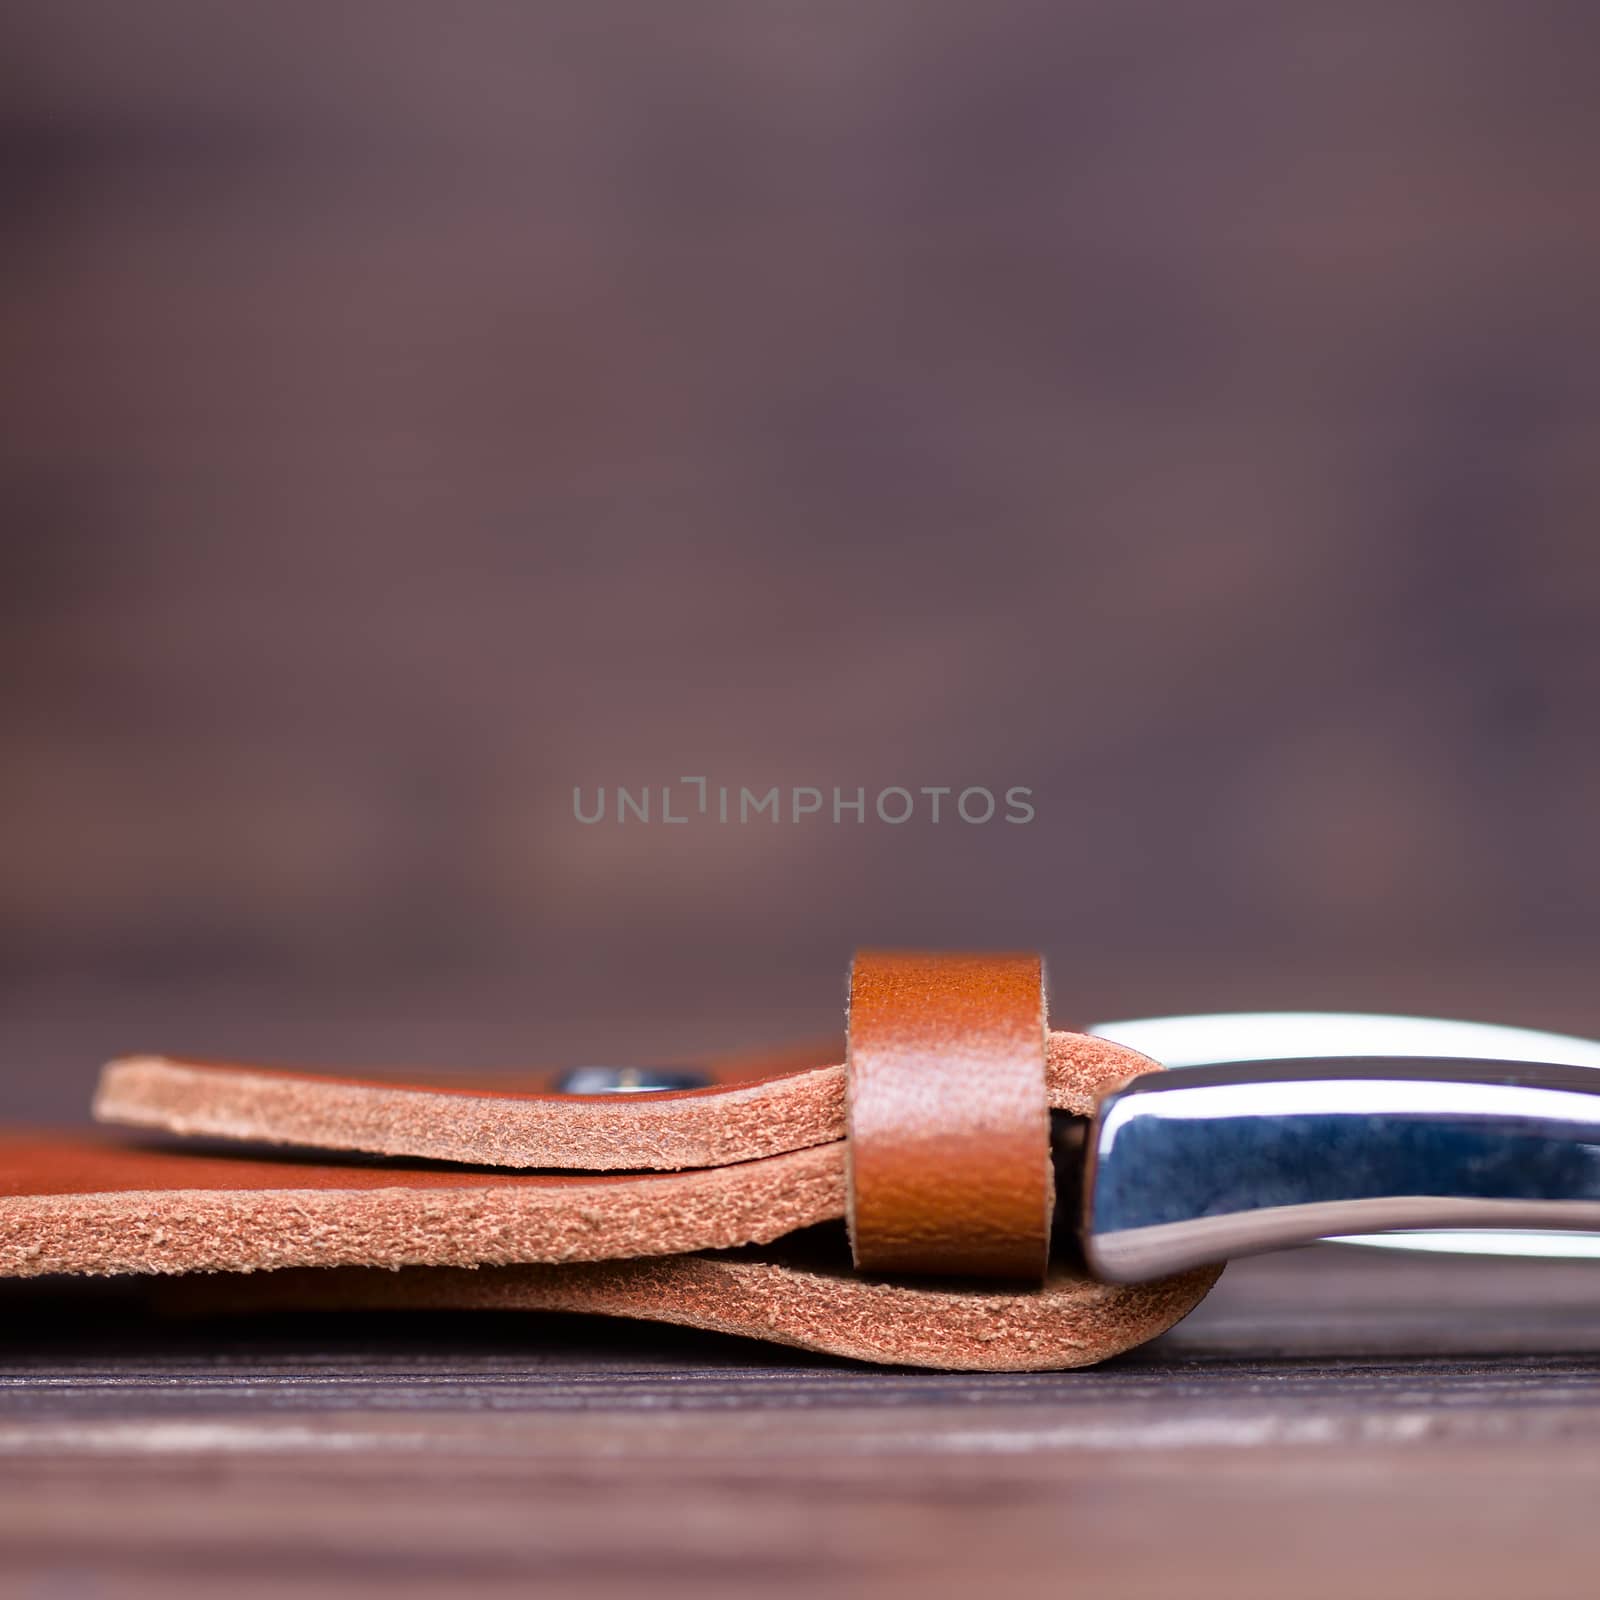 Ginger color handmade belt buckle lies on textured wooden background closeup. Side view. Stock photo of businessman accessories with blurred background. by alexsdriver